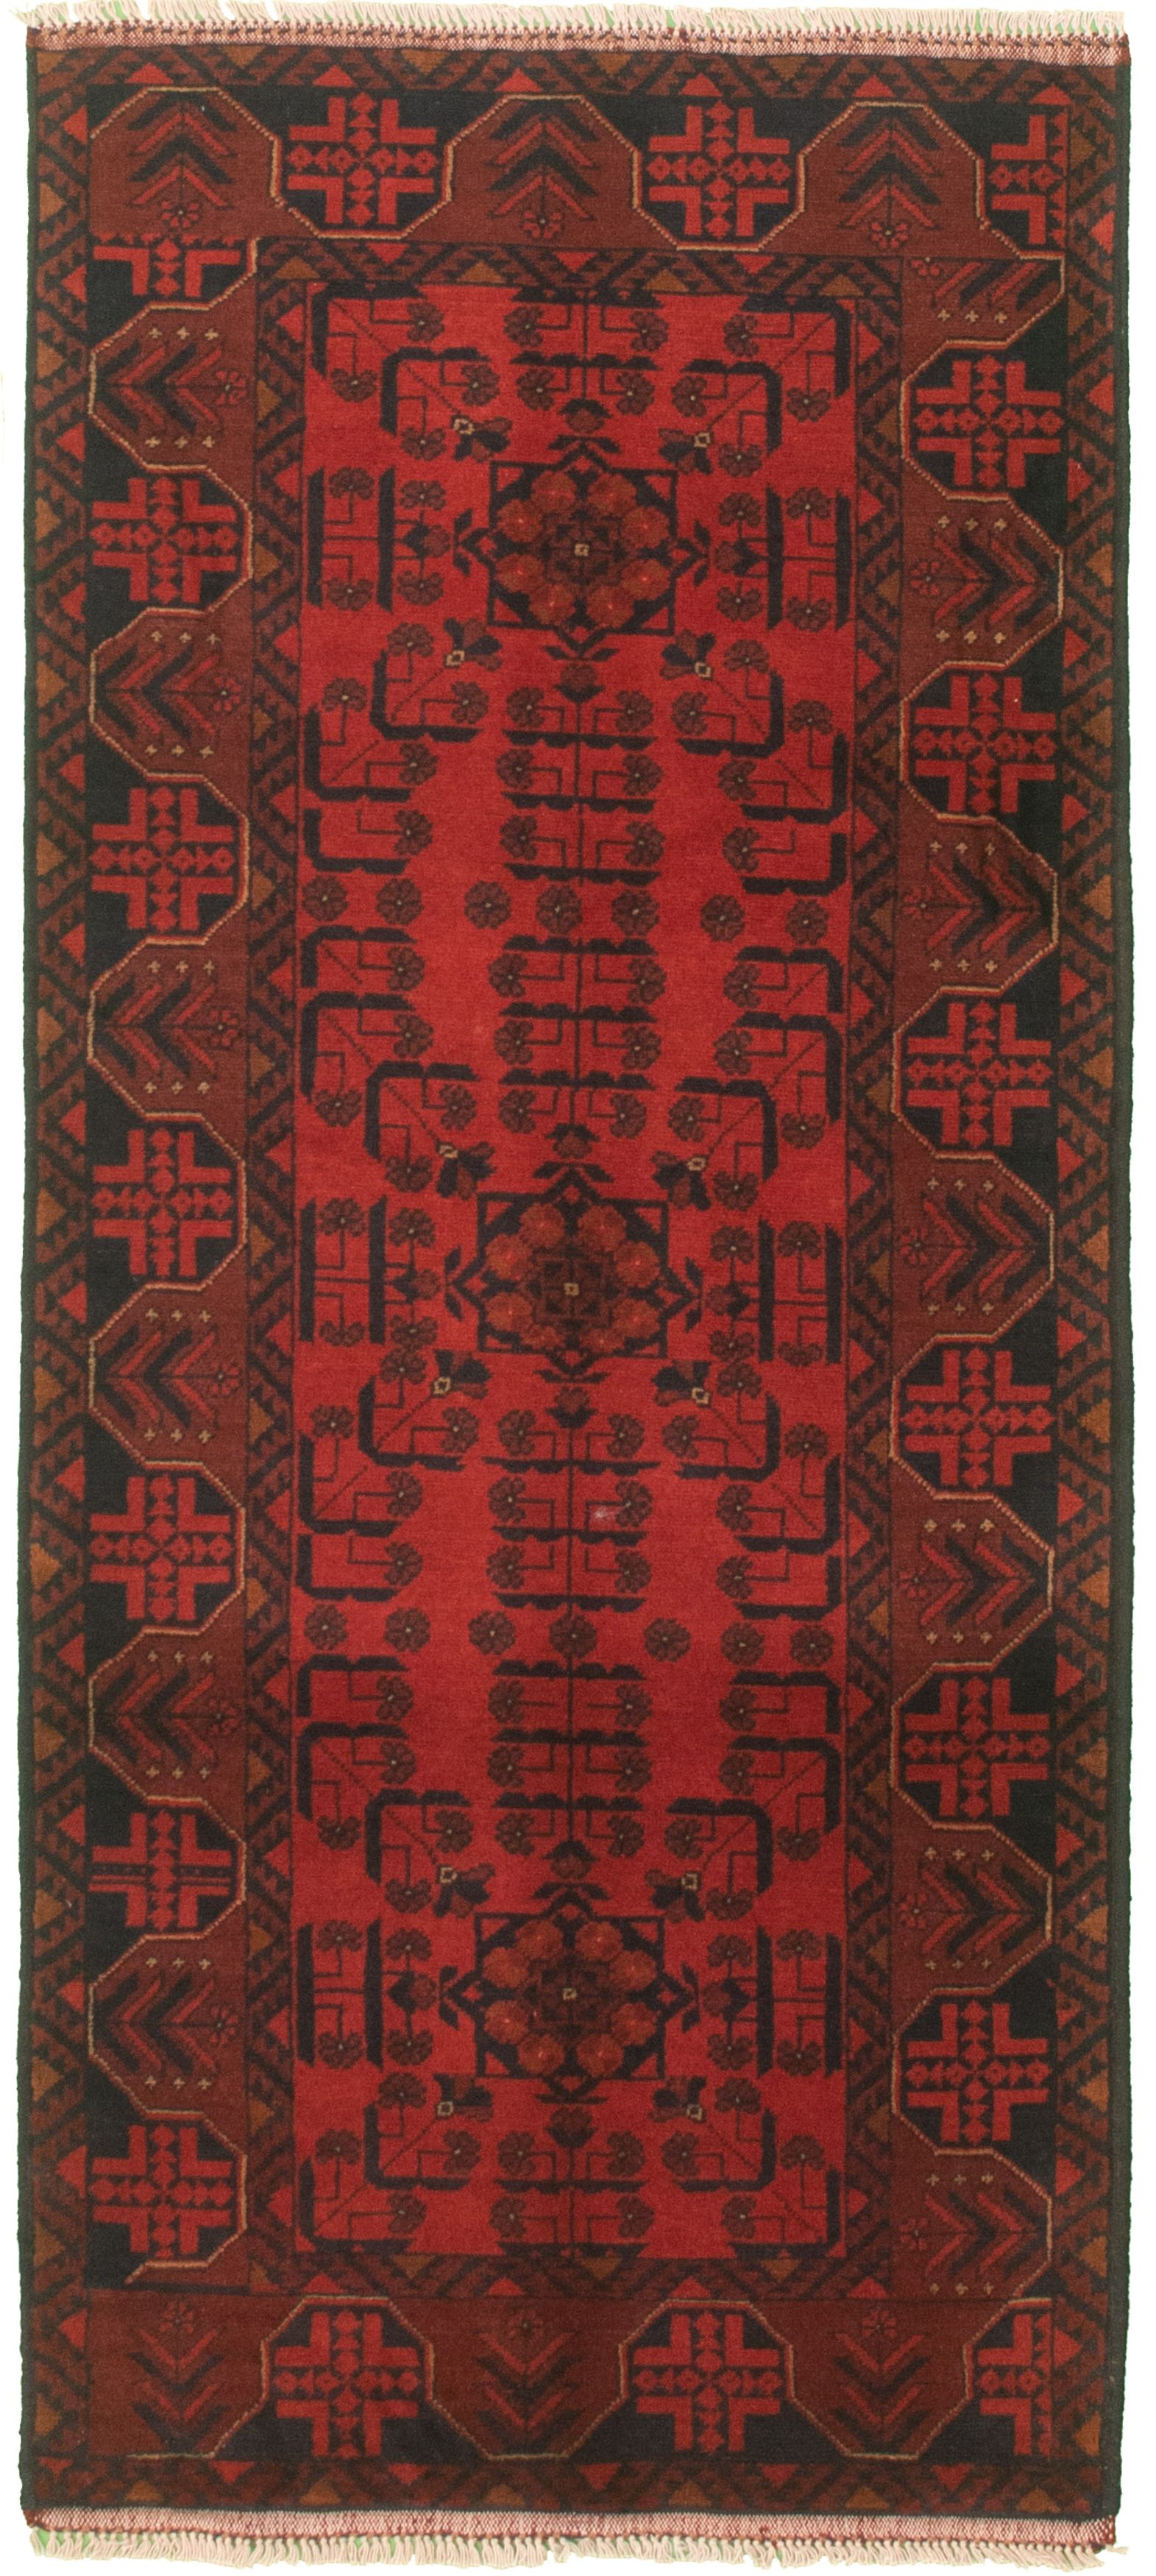 Hand-knotted Finest Khal Mohammadi Red Wool Rug 2'8" x 6'4" (14) Size: 2'8" x 6'4"  